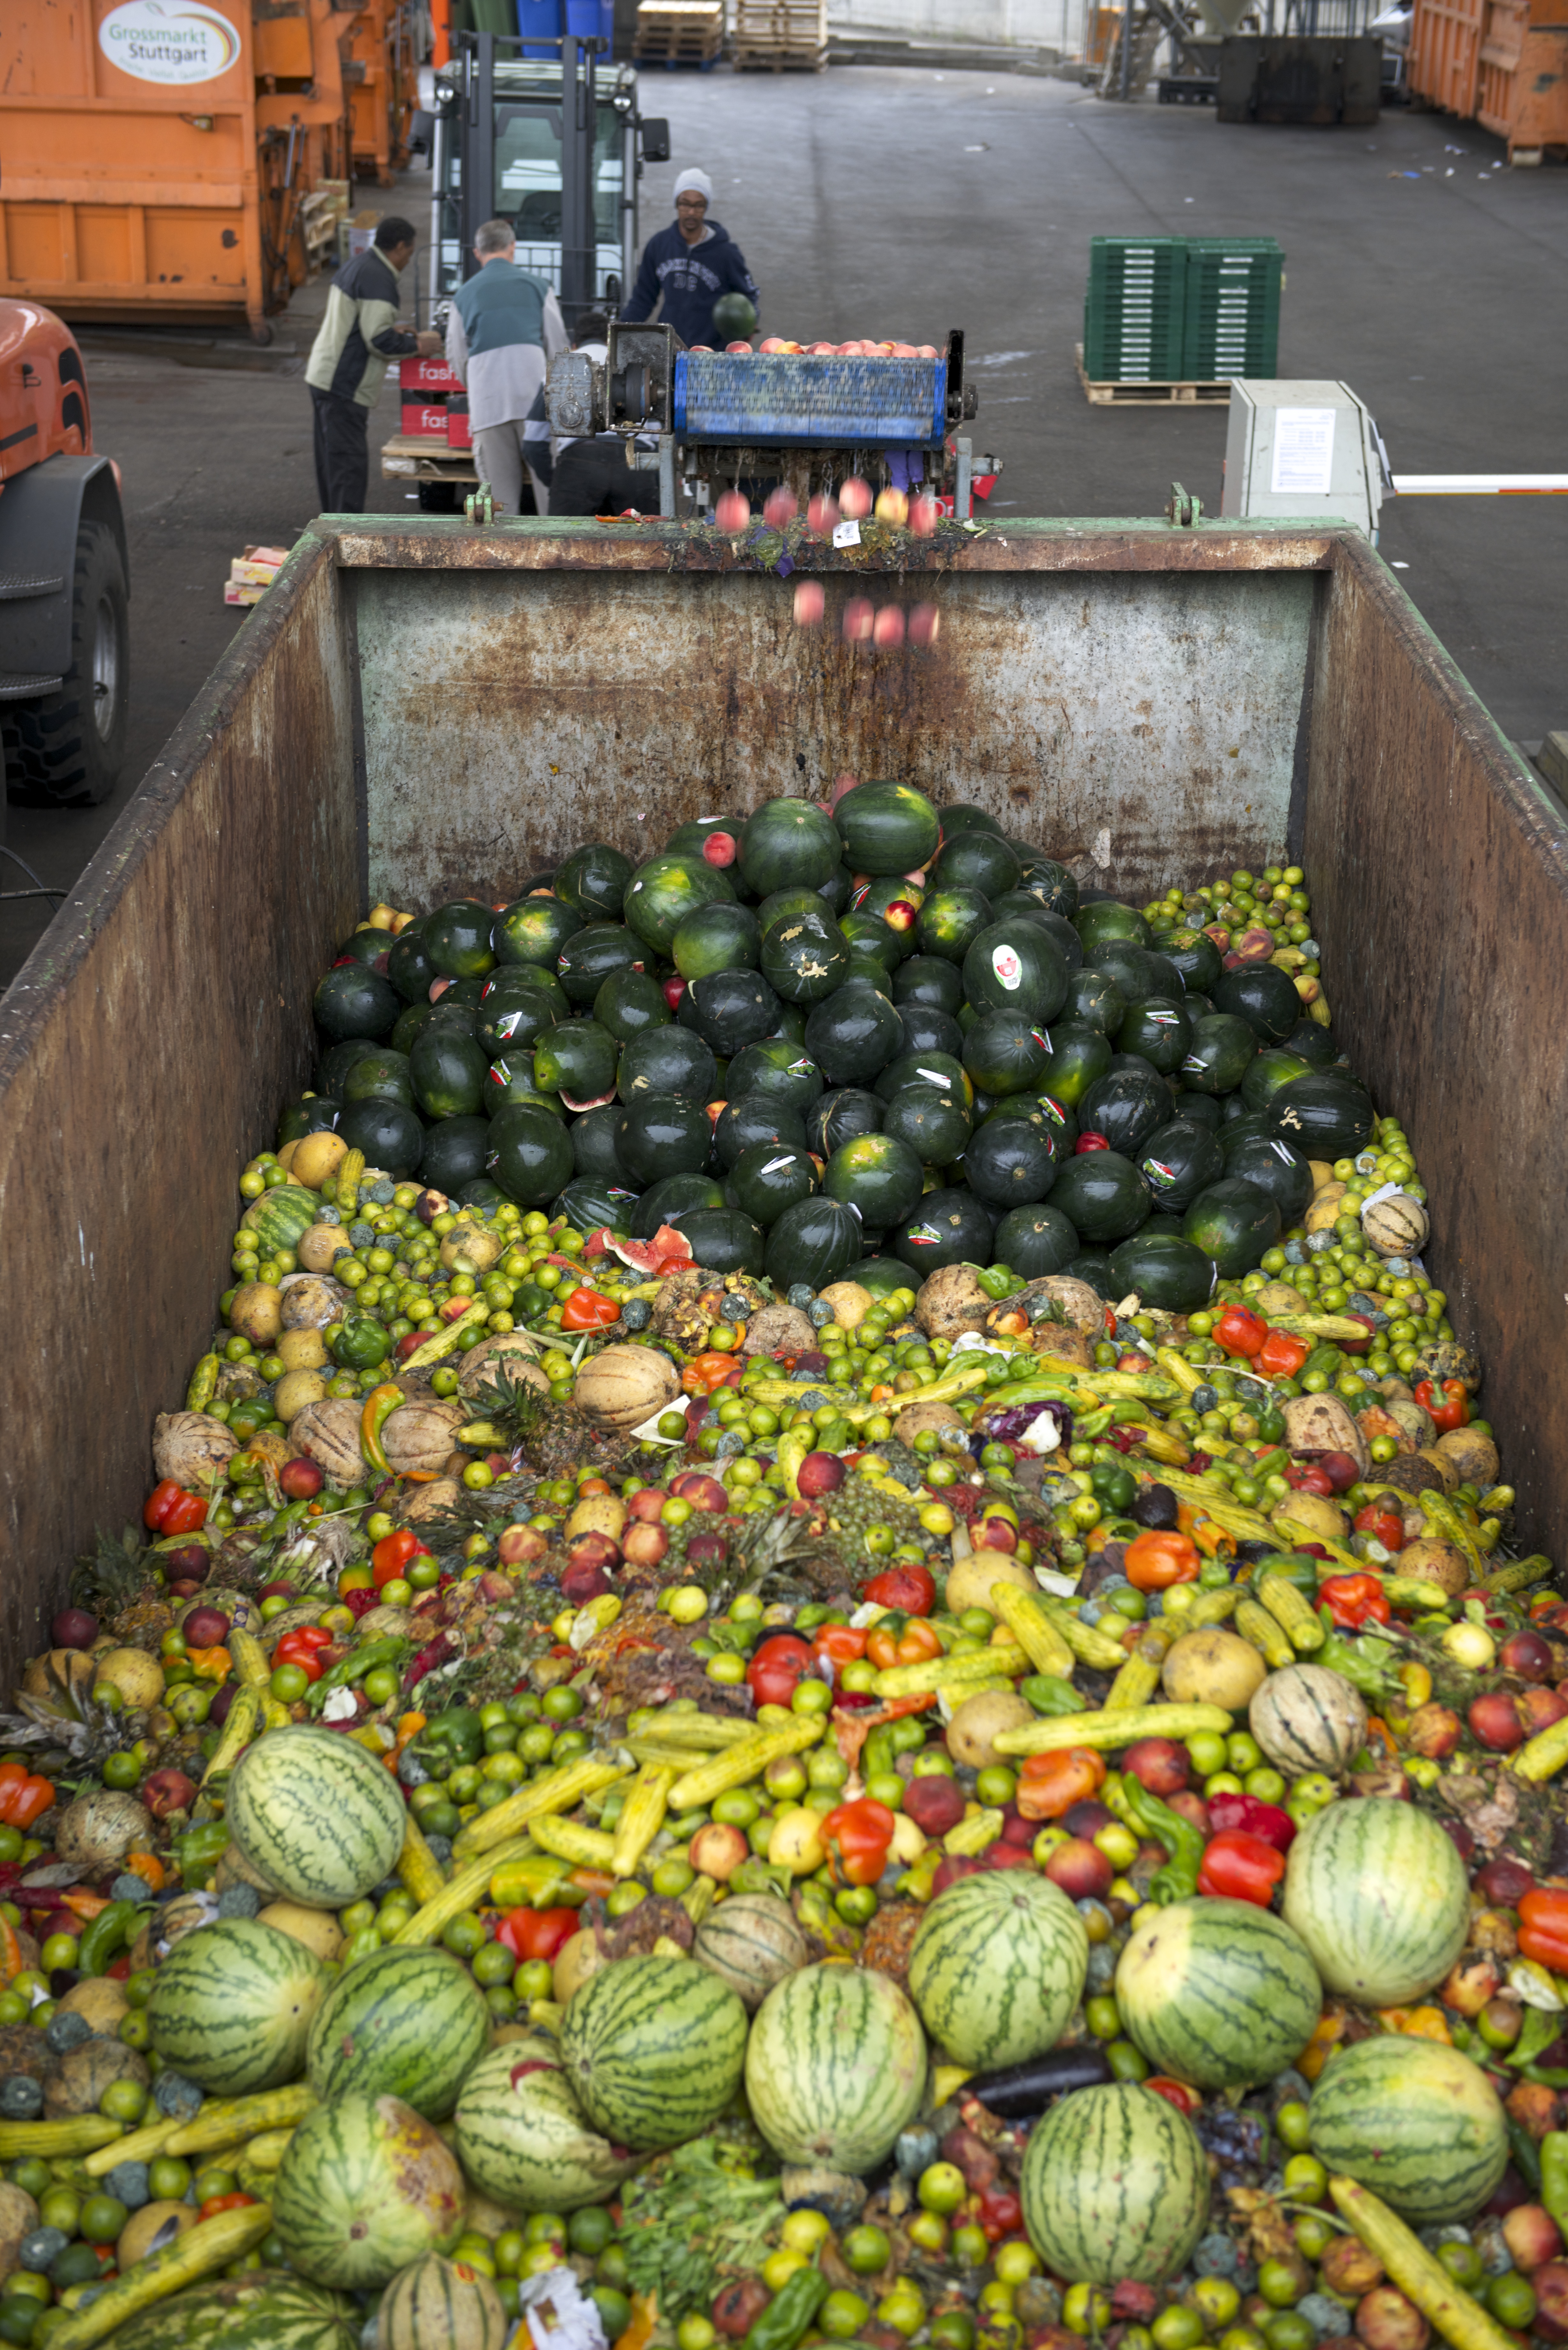 Fruit and vegetable waste from the Stuttgart wholesale market.